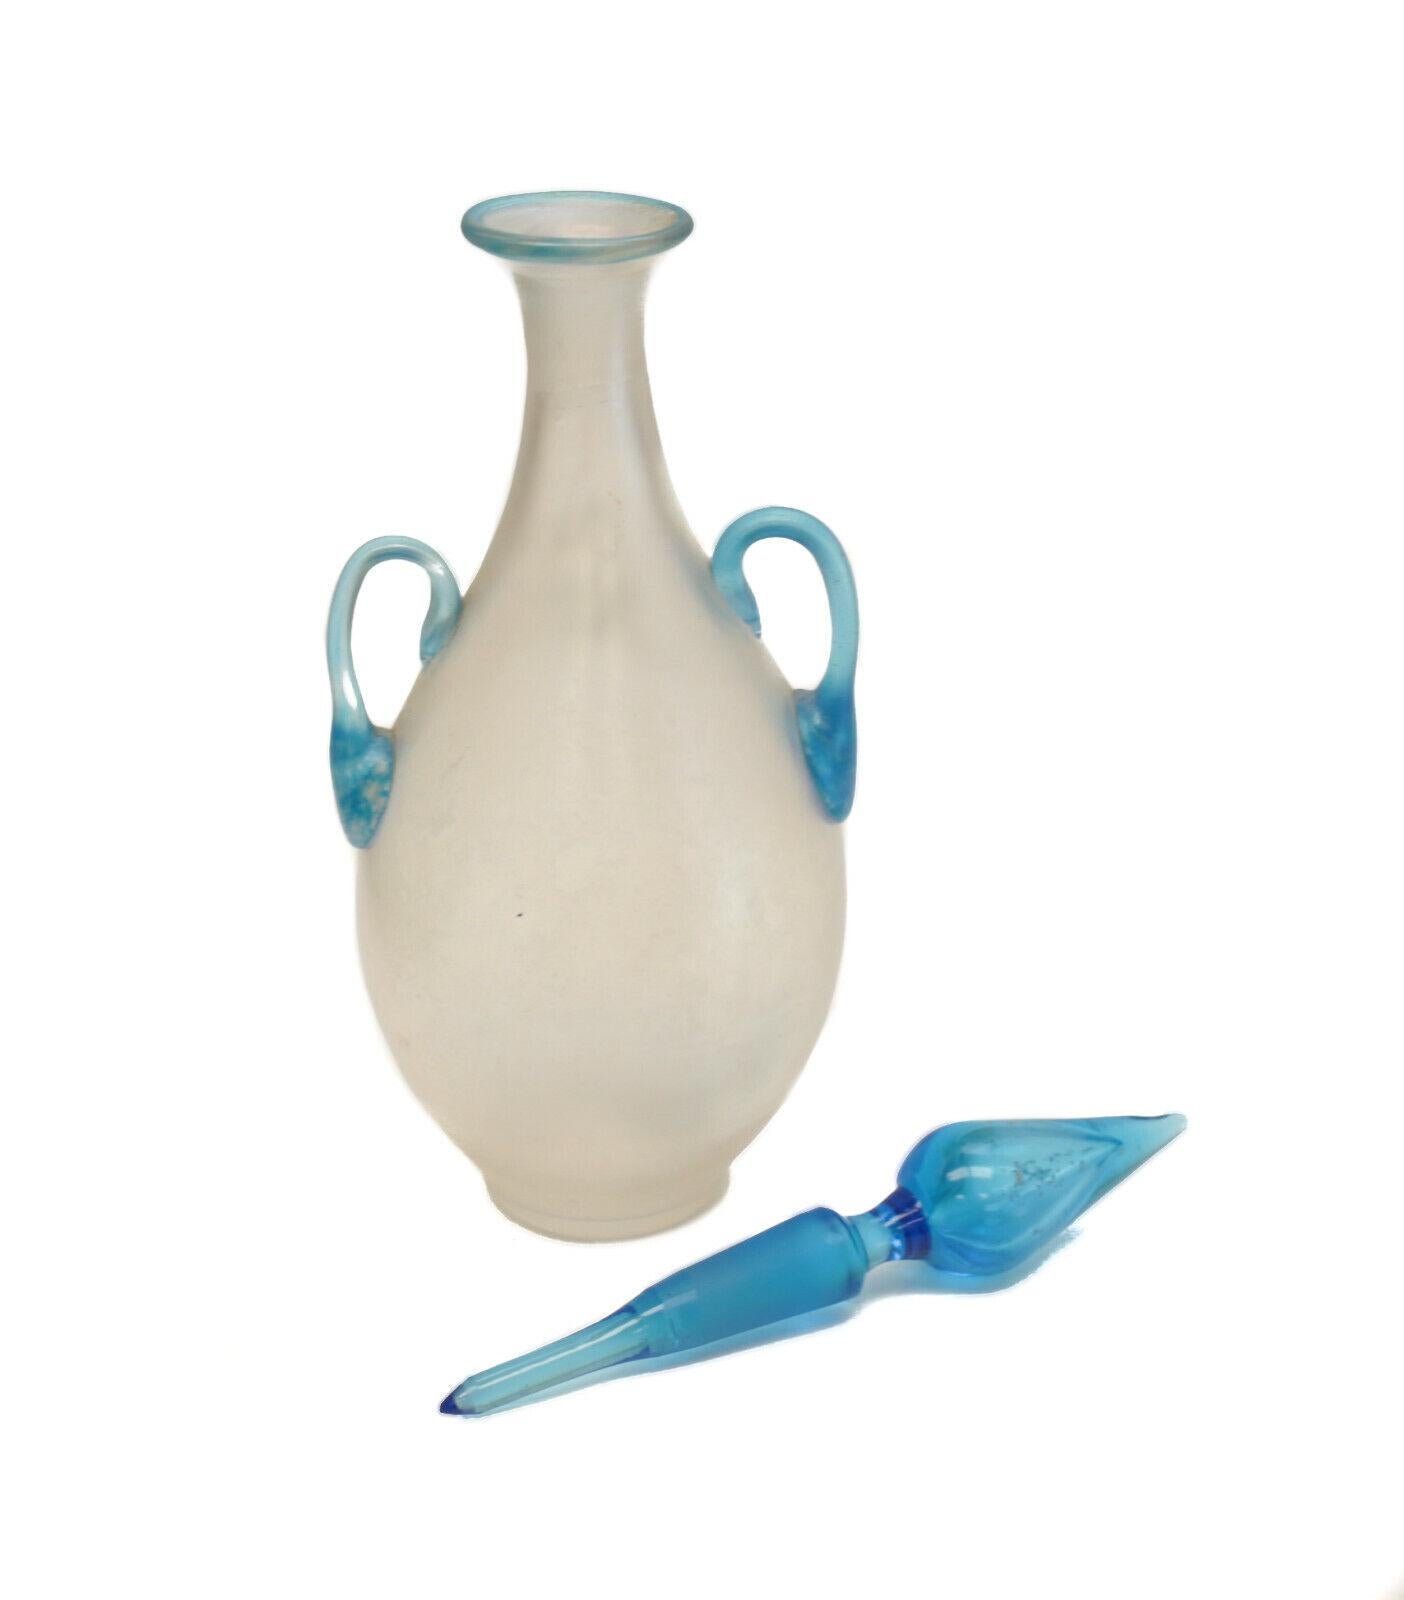 Steuben Silk Glass Perfume Bottle with Handles & Celeste Blue Stopper #3048 In Good Condition For Sale In Gardena, CA